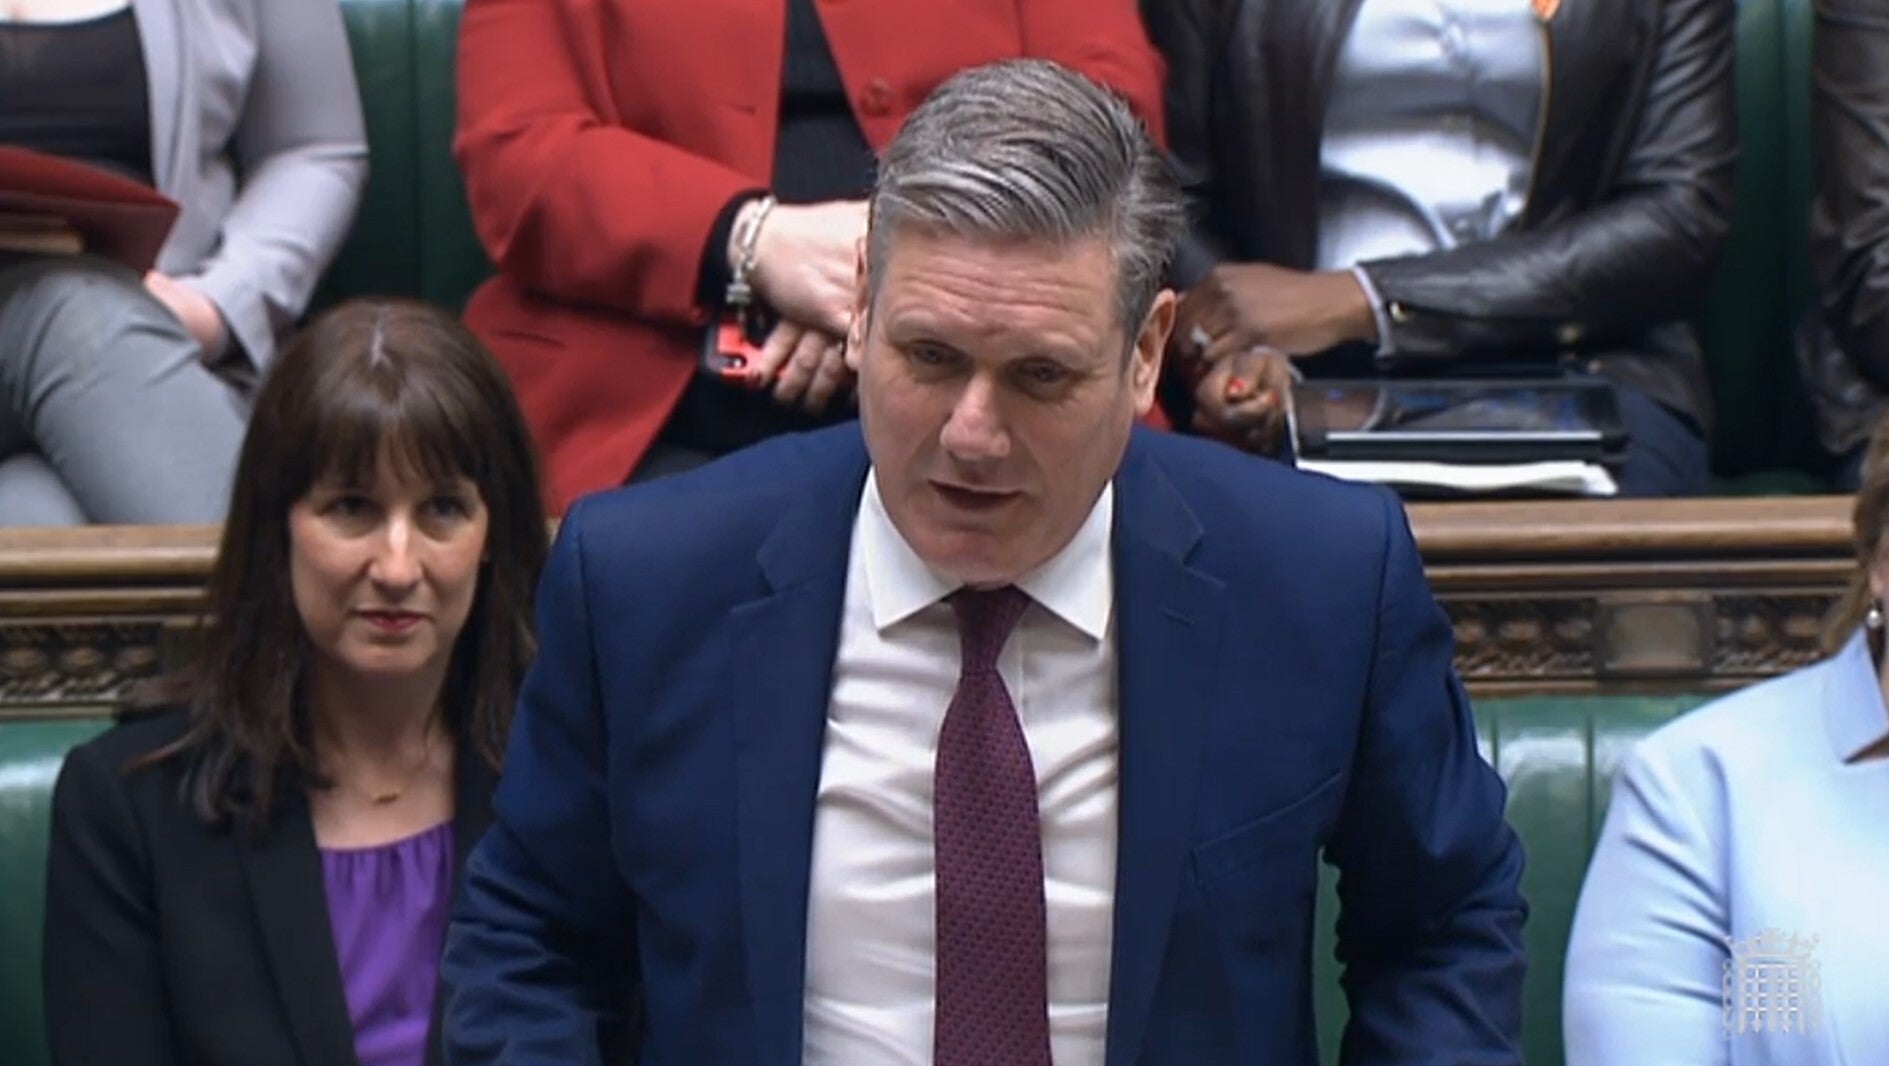 Labour leader Sir Keir Starmer suggested Boris Johnson should quit for misleading the Commons (House of Commons/PA)